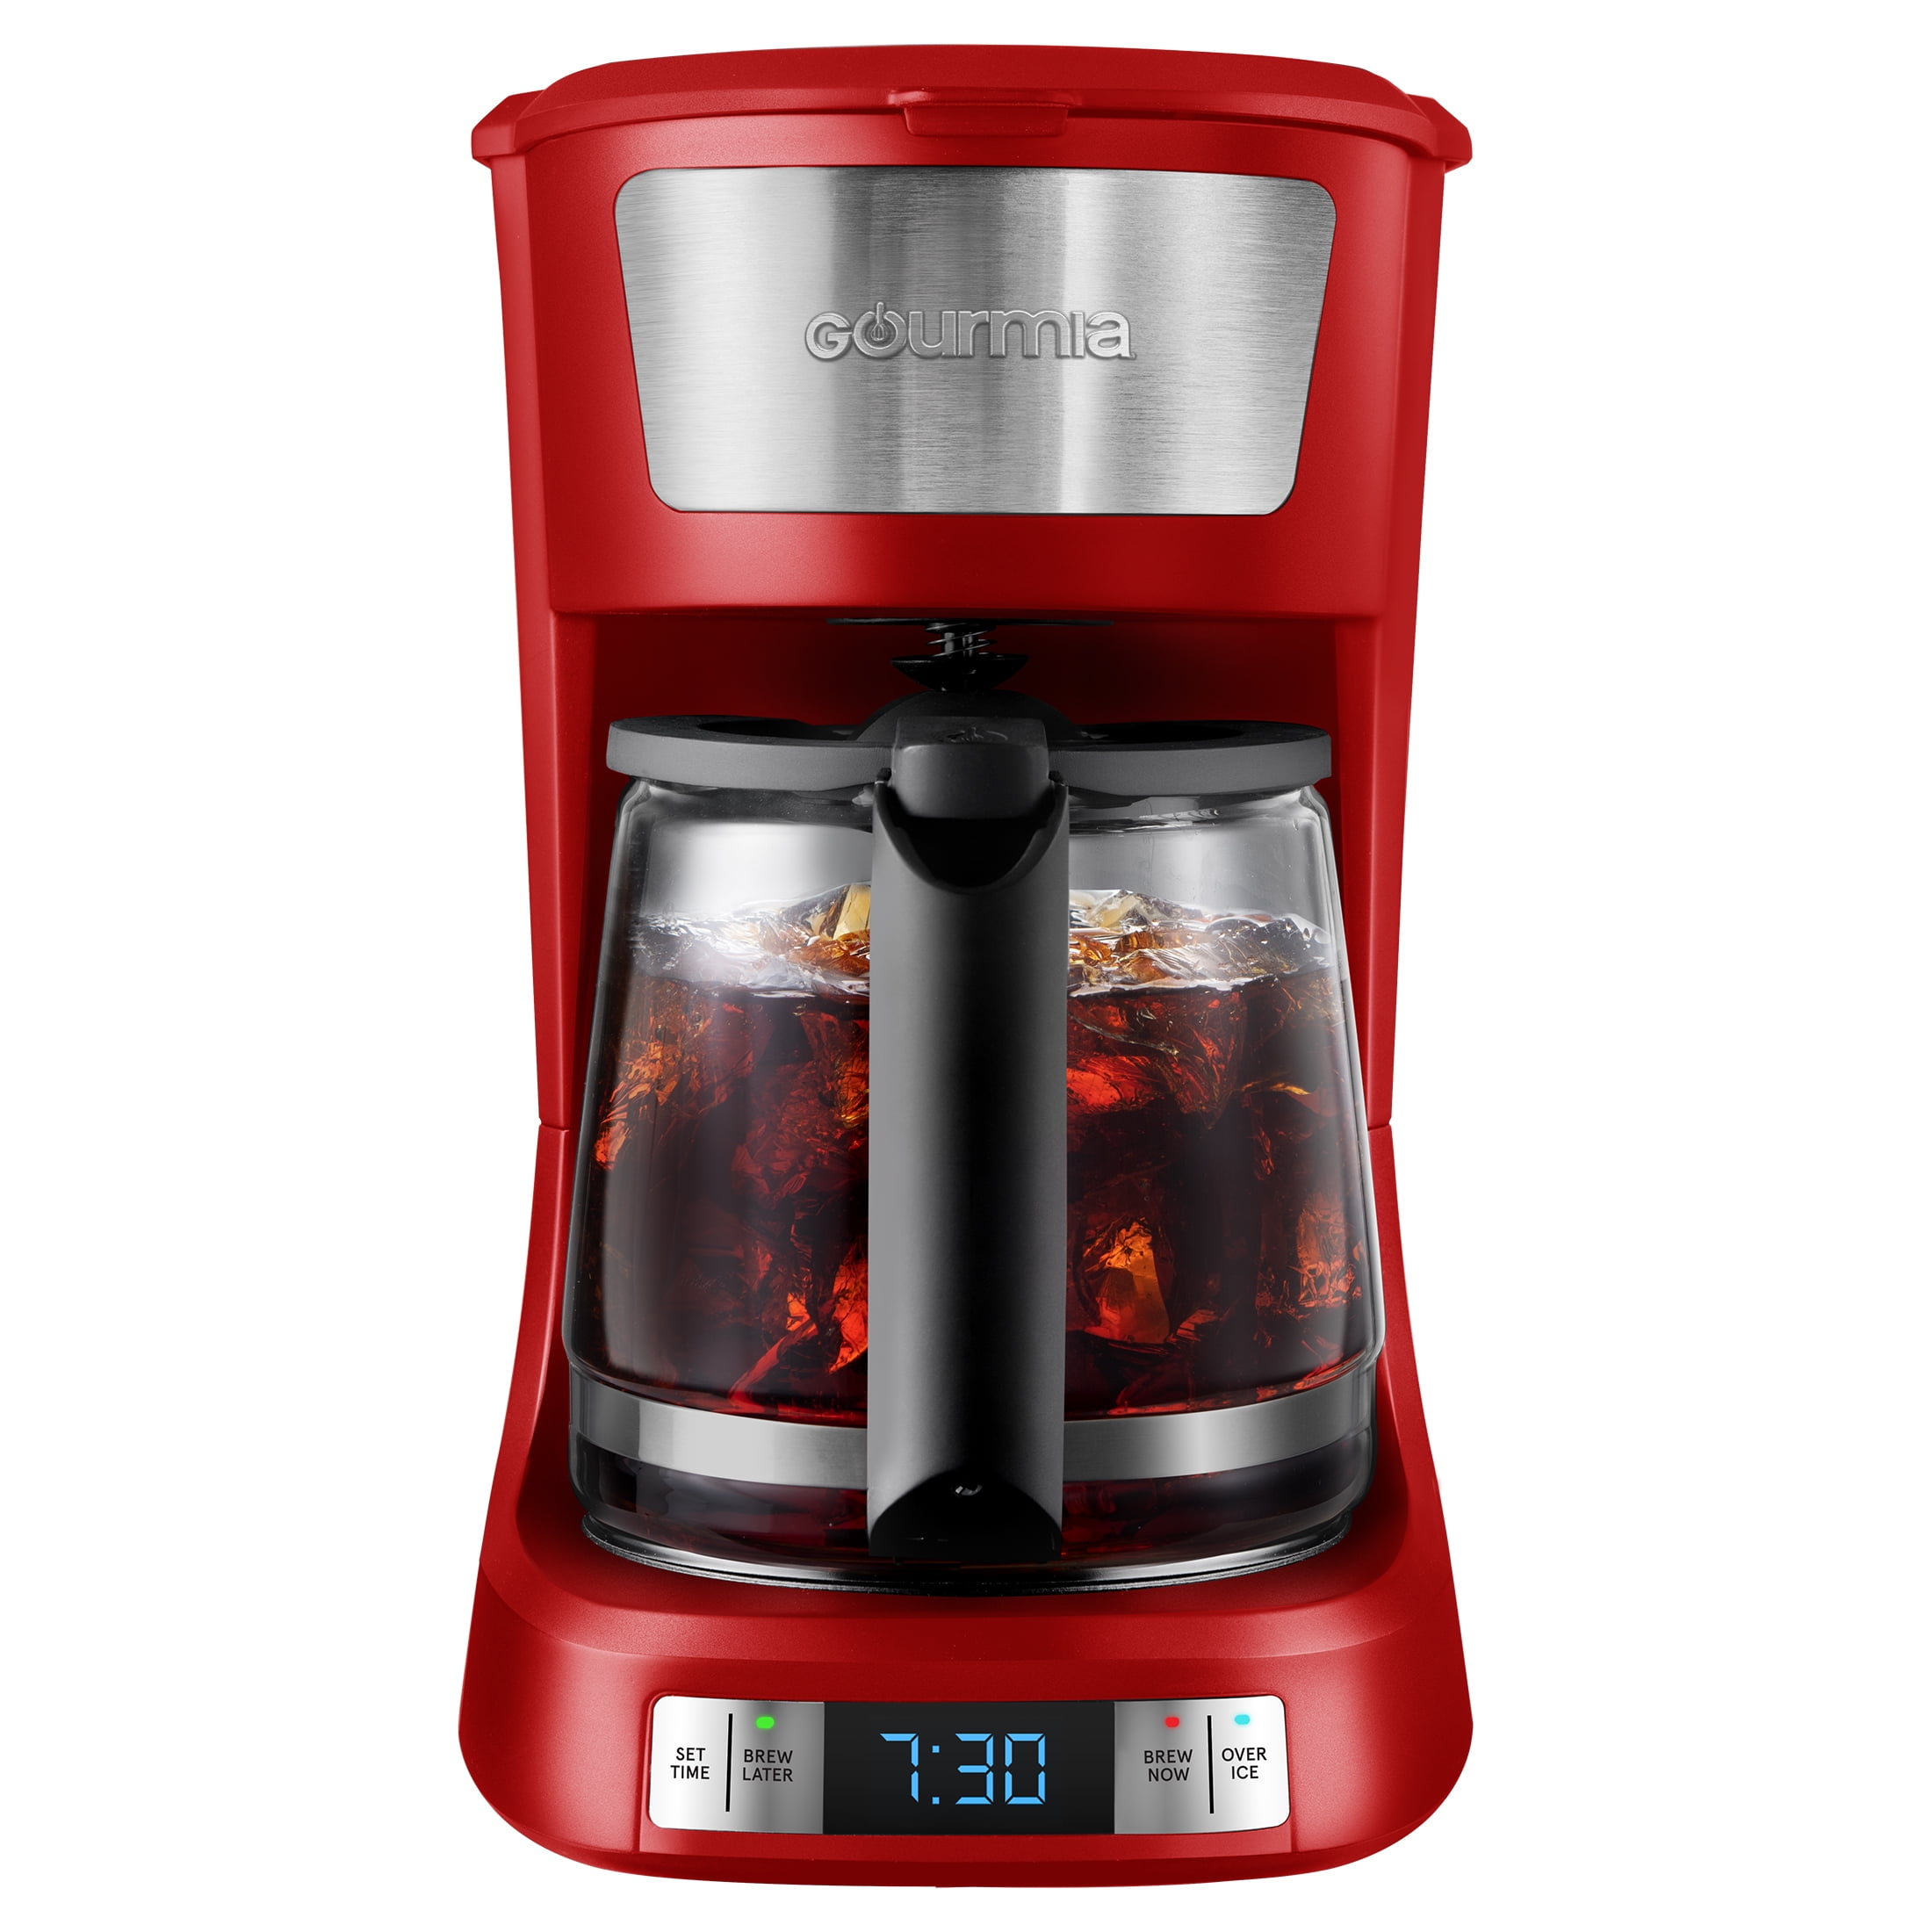 Gourmia 12 Cup Programmable Hot & Iced Coffee Maker with Keep Warm Feature - Red